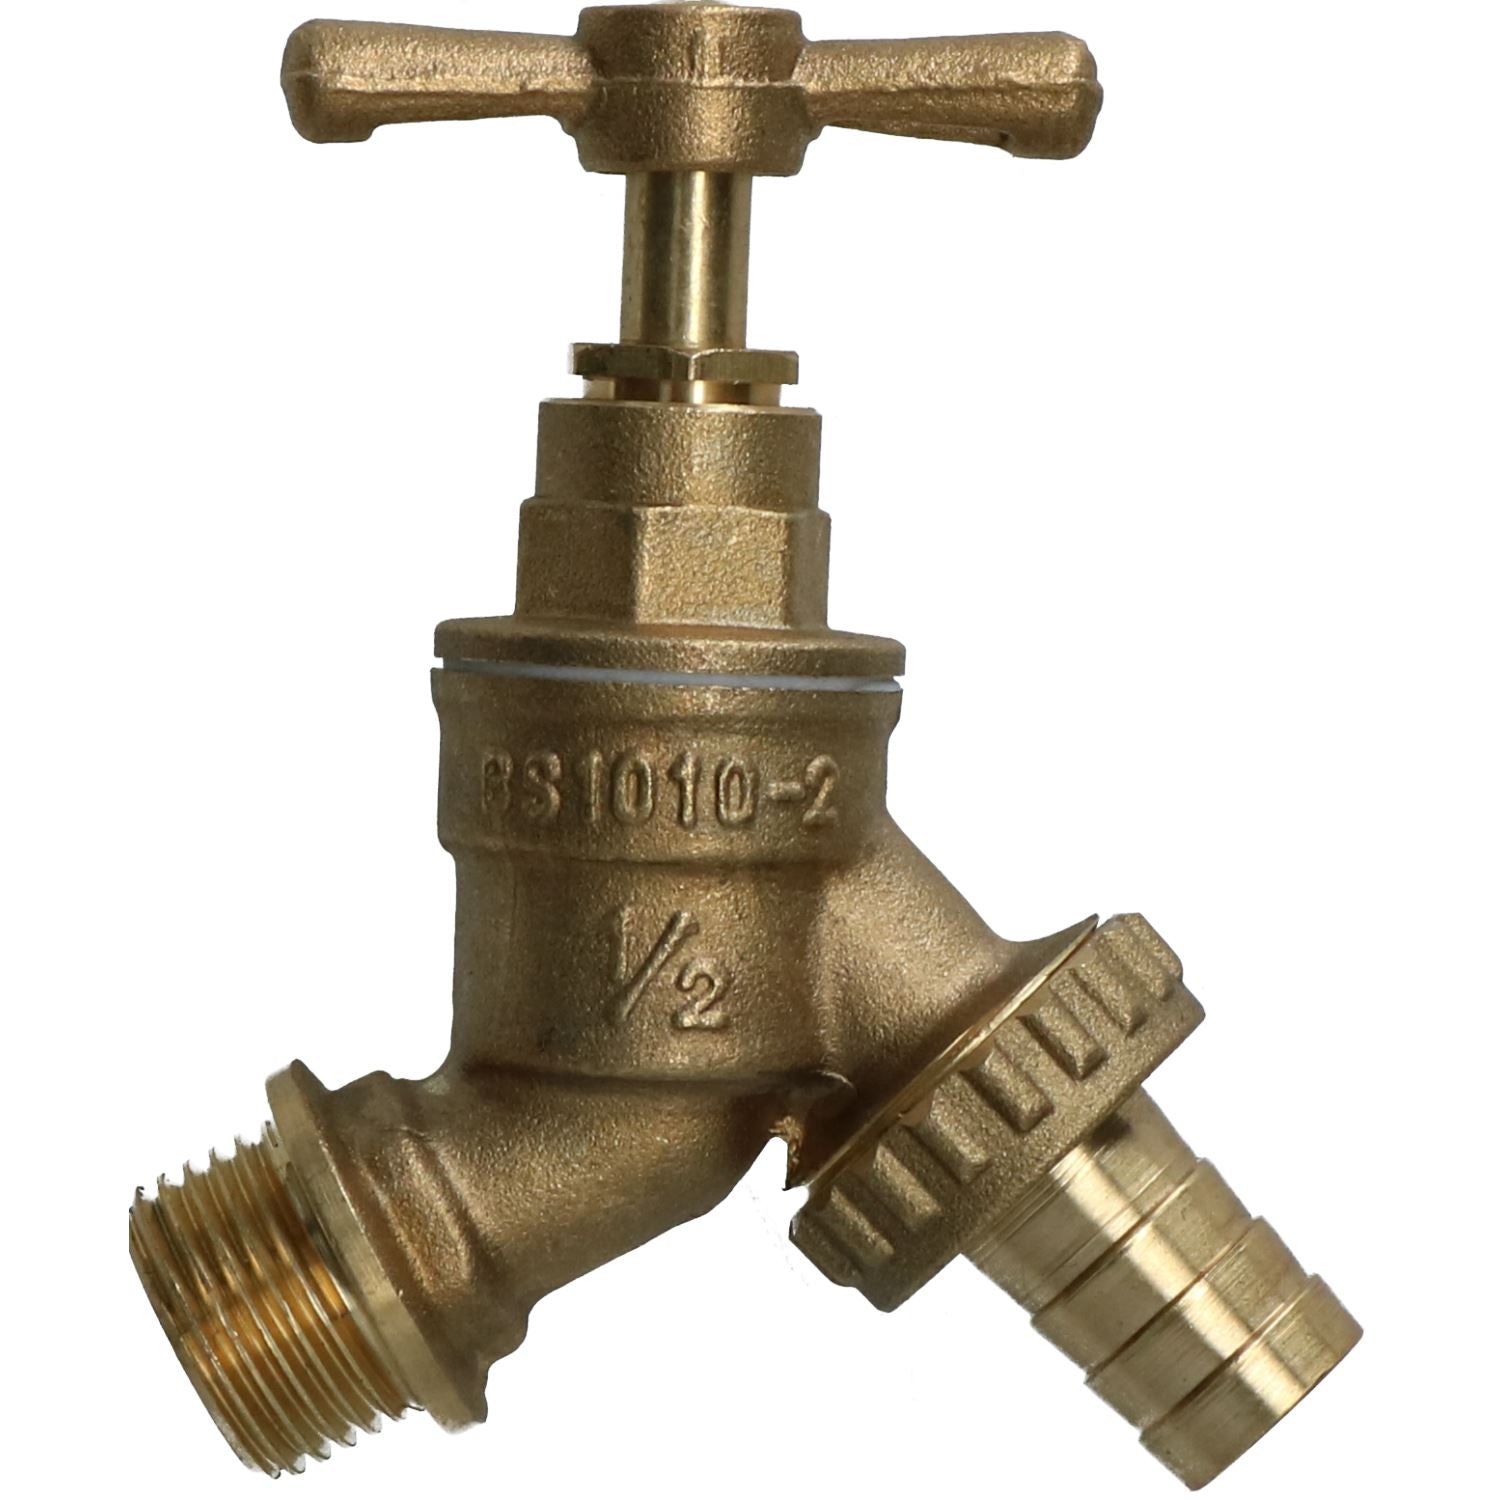 1/2" (15mm) Hose Union Bib Tap Brass Outdoor Water Supply Weather-Resistant